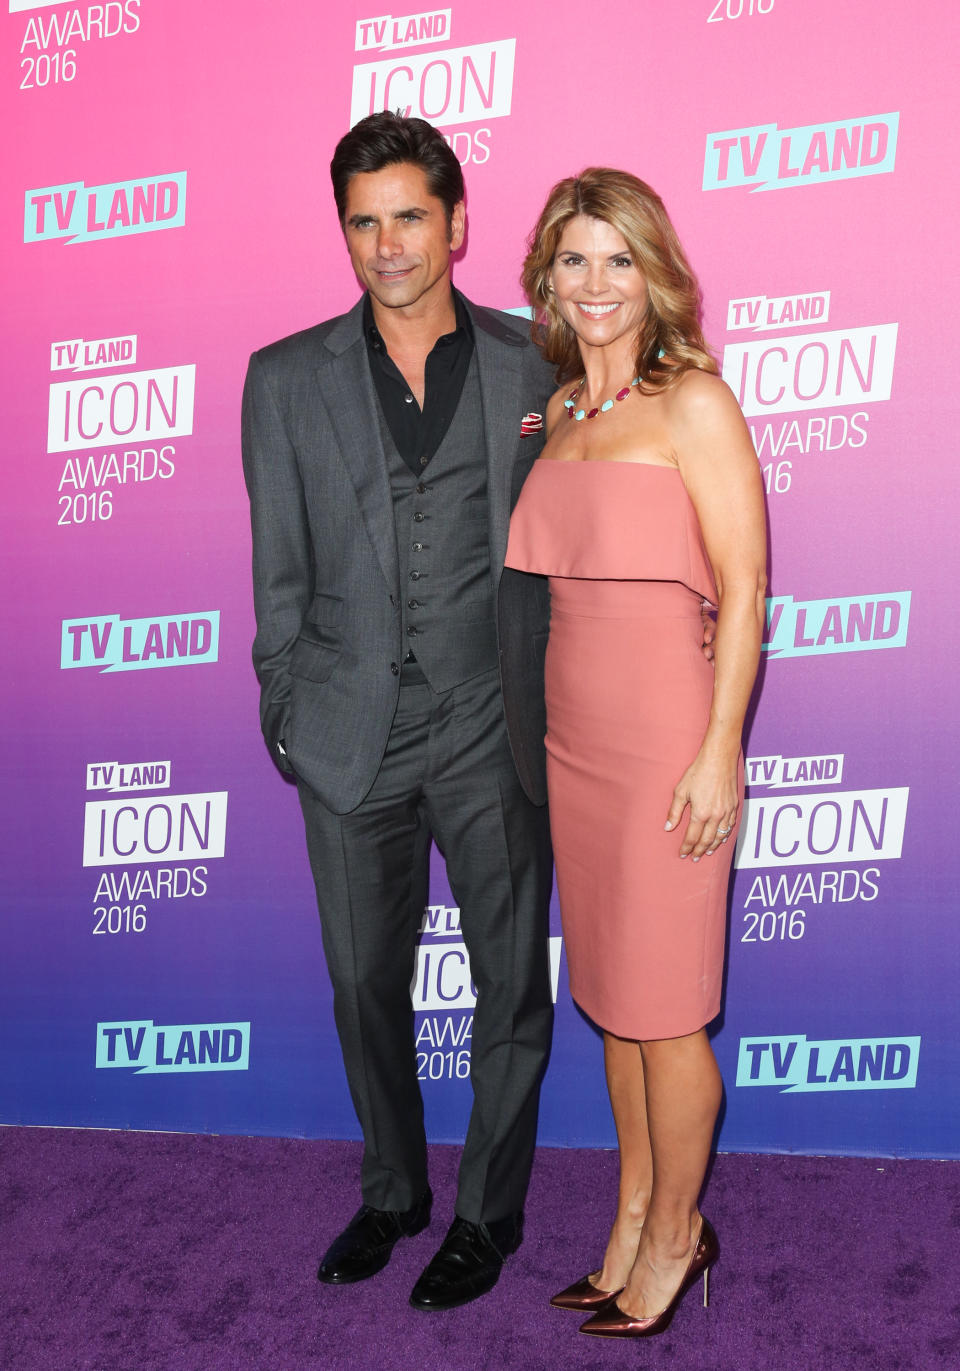 John Stamos Reveals He Told Lori Loughlin About the College Admissions Scandal Making Headlines